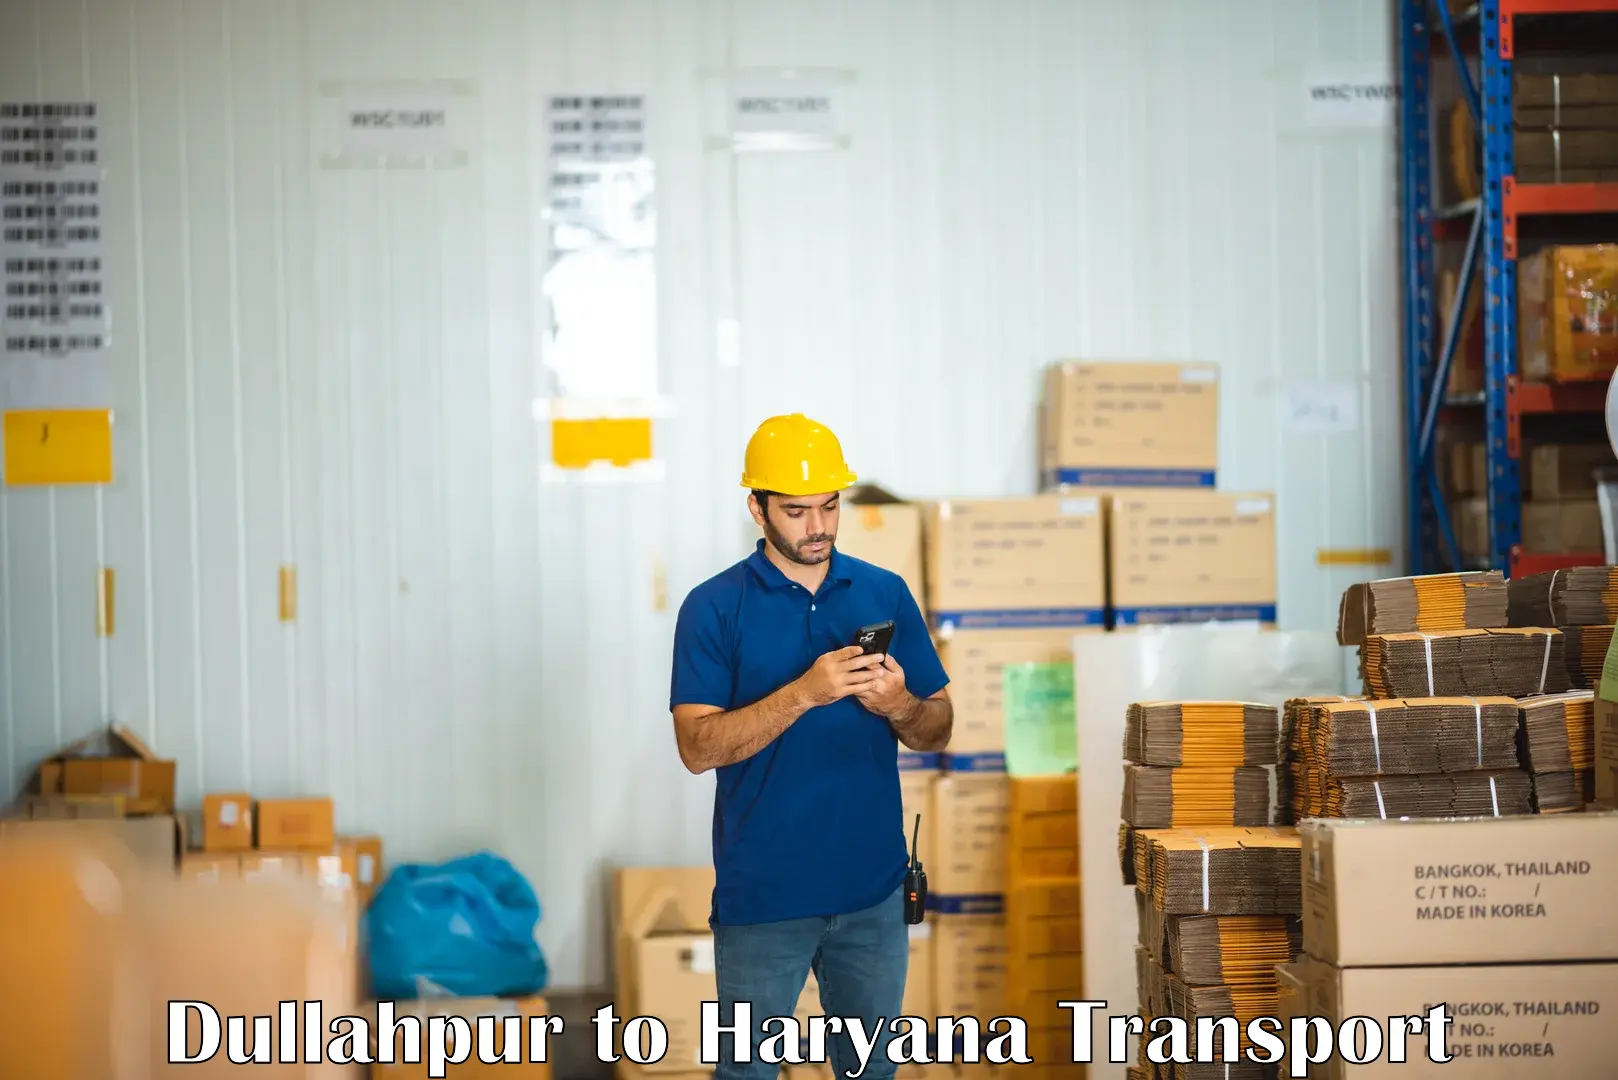 Daily parcel service transport Dullahpur to Siwani